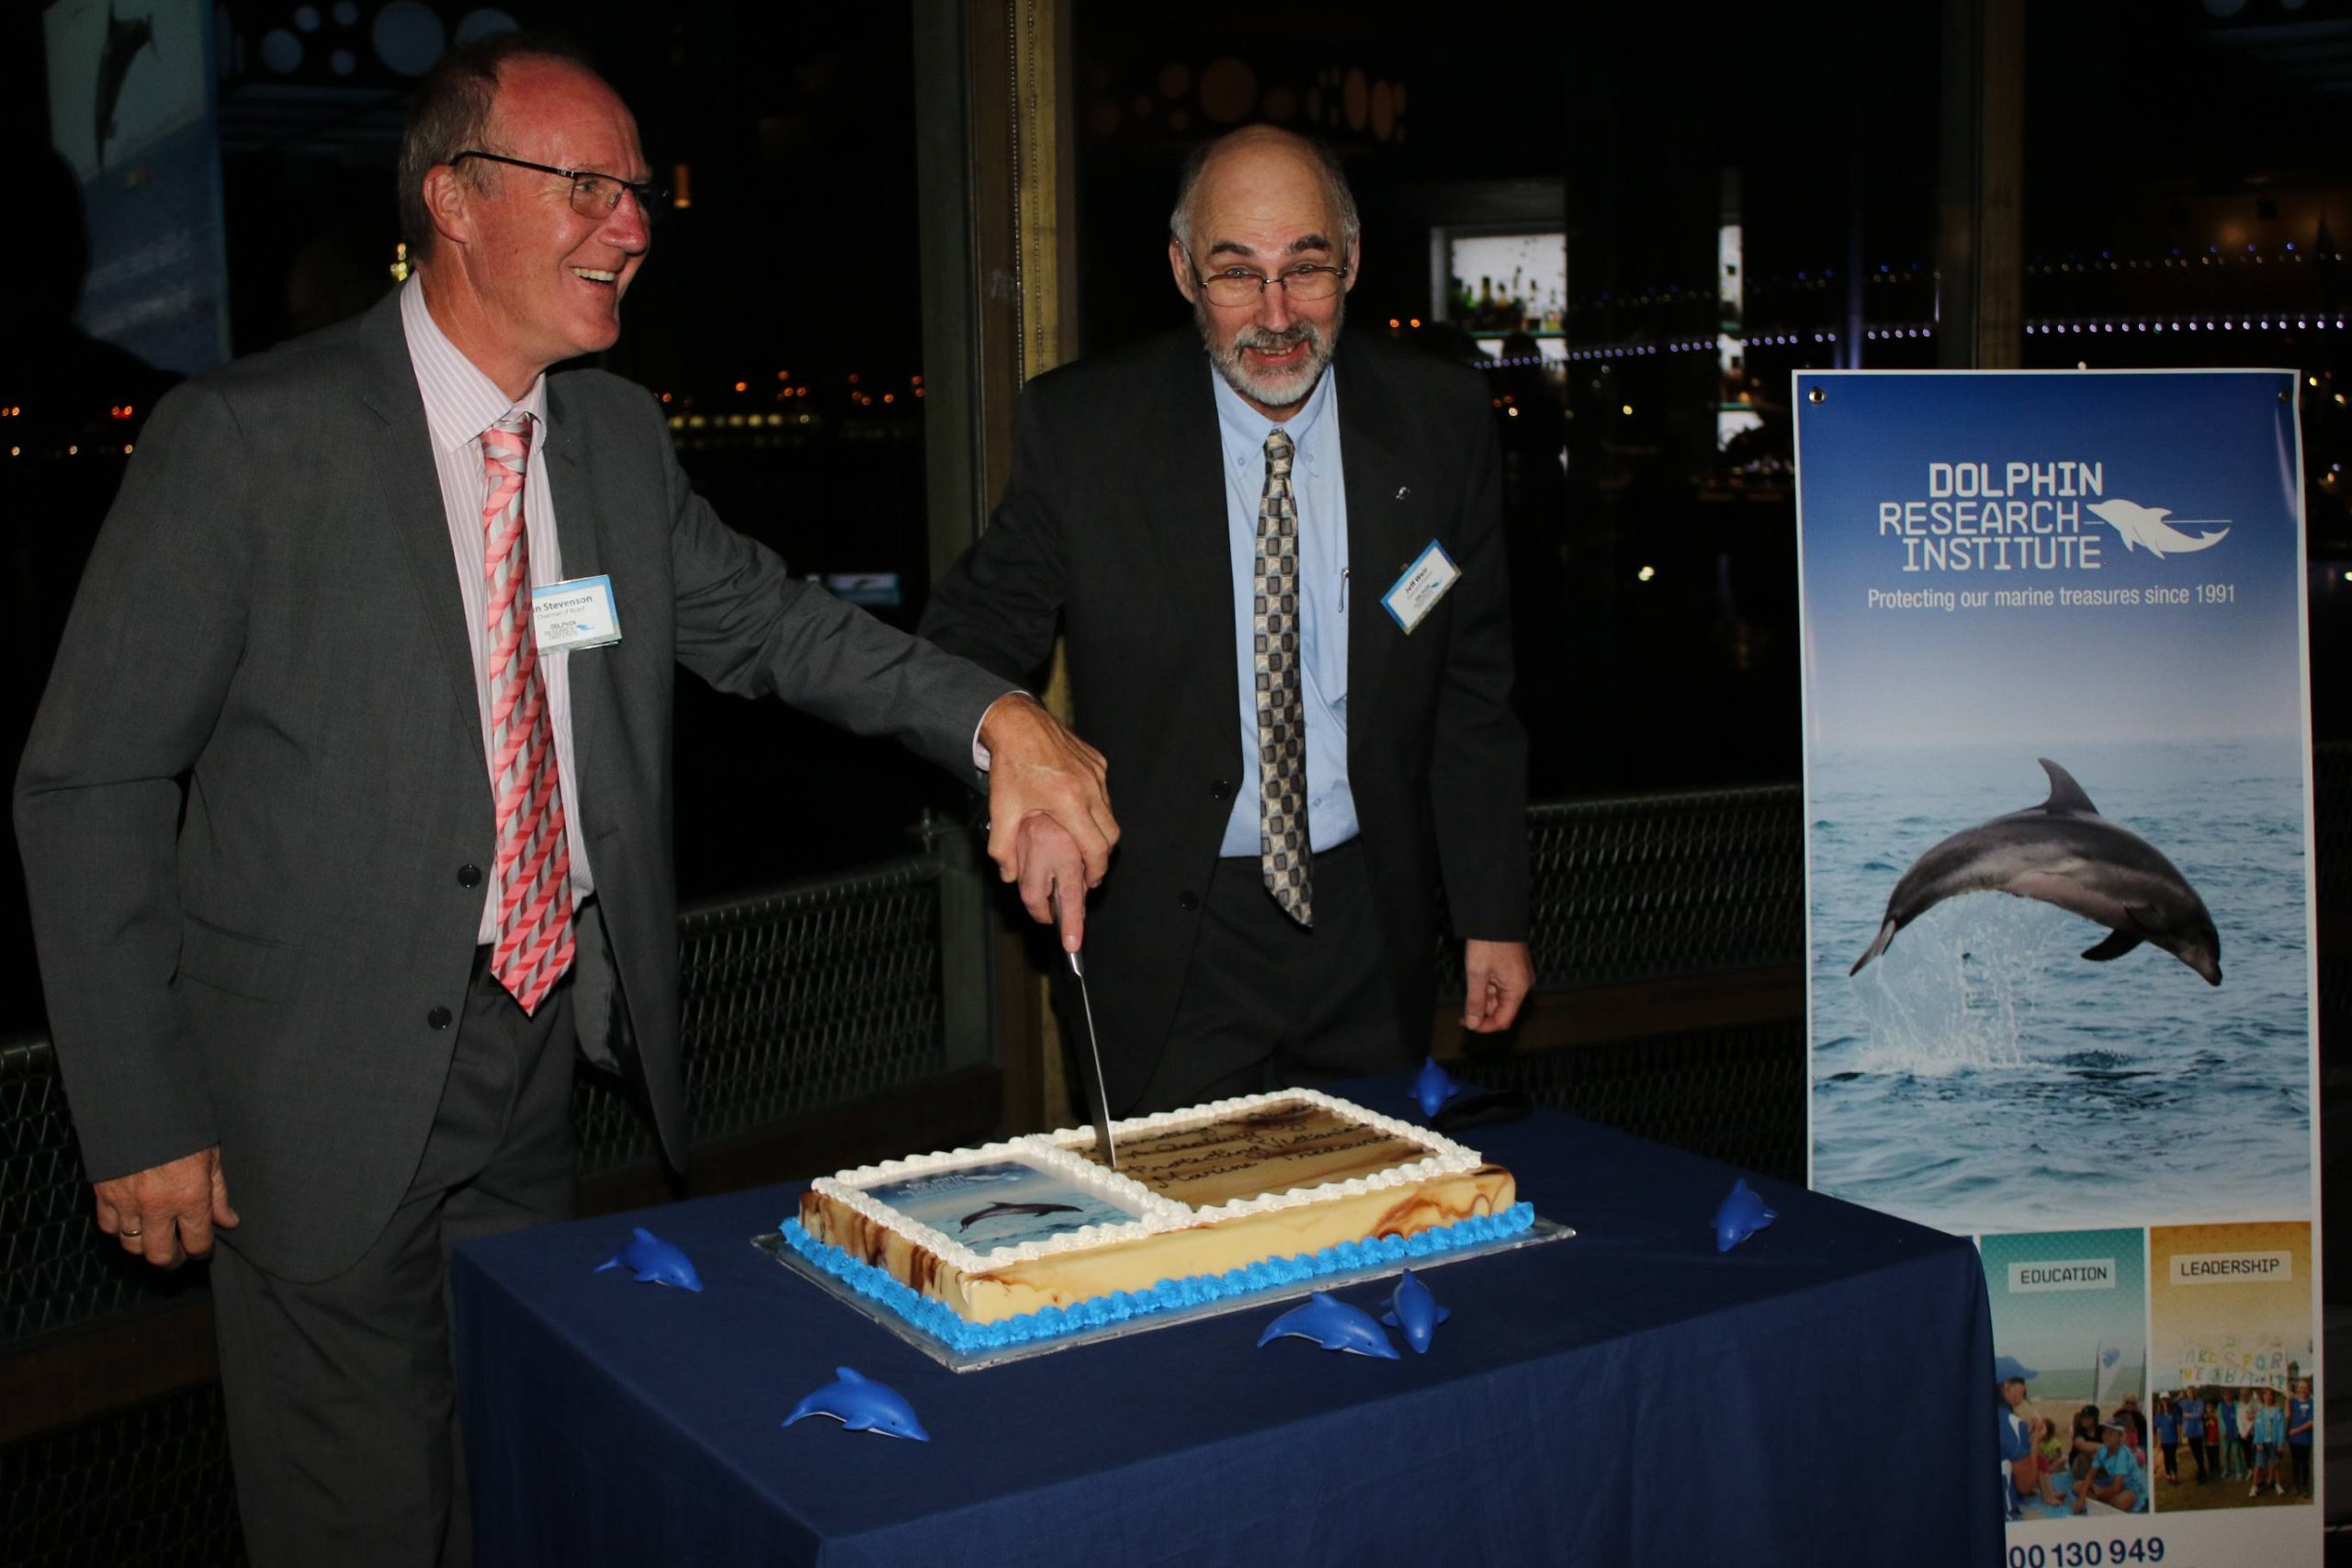 Happy Birthday, Dolphin Research Institute